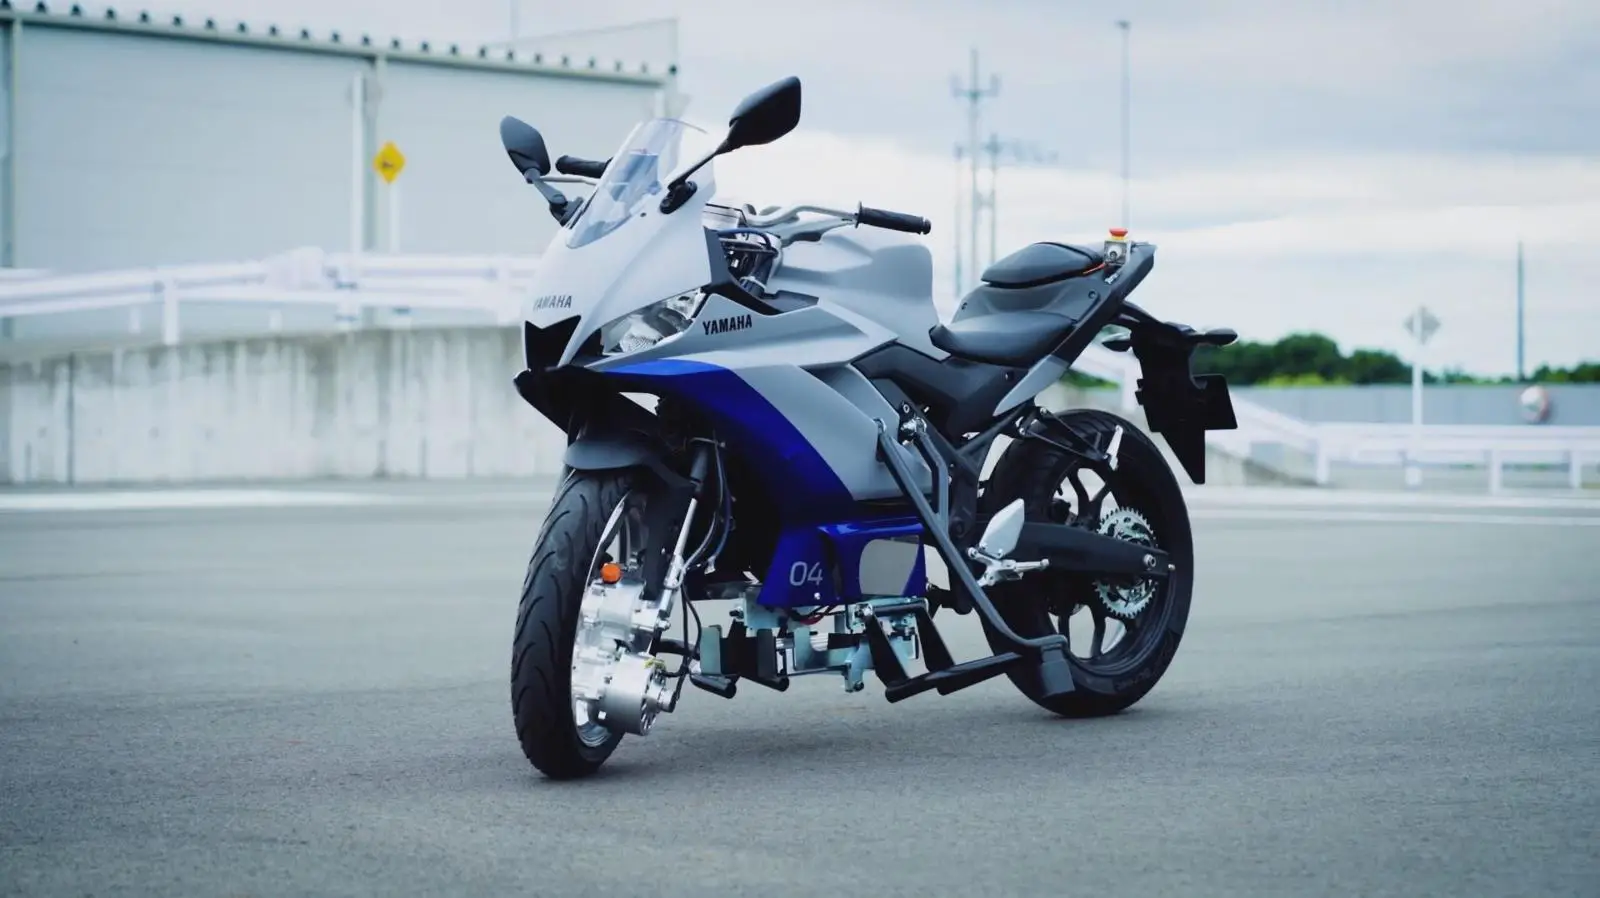 More information about "Yamaha Motors Revolutionises Motorcycle Stability with Cutting-Edge Technology"